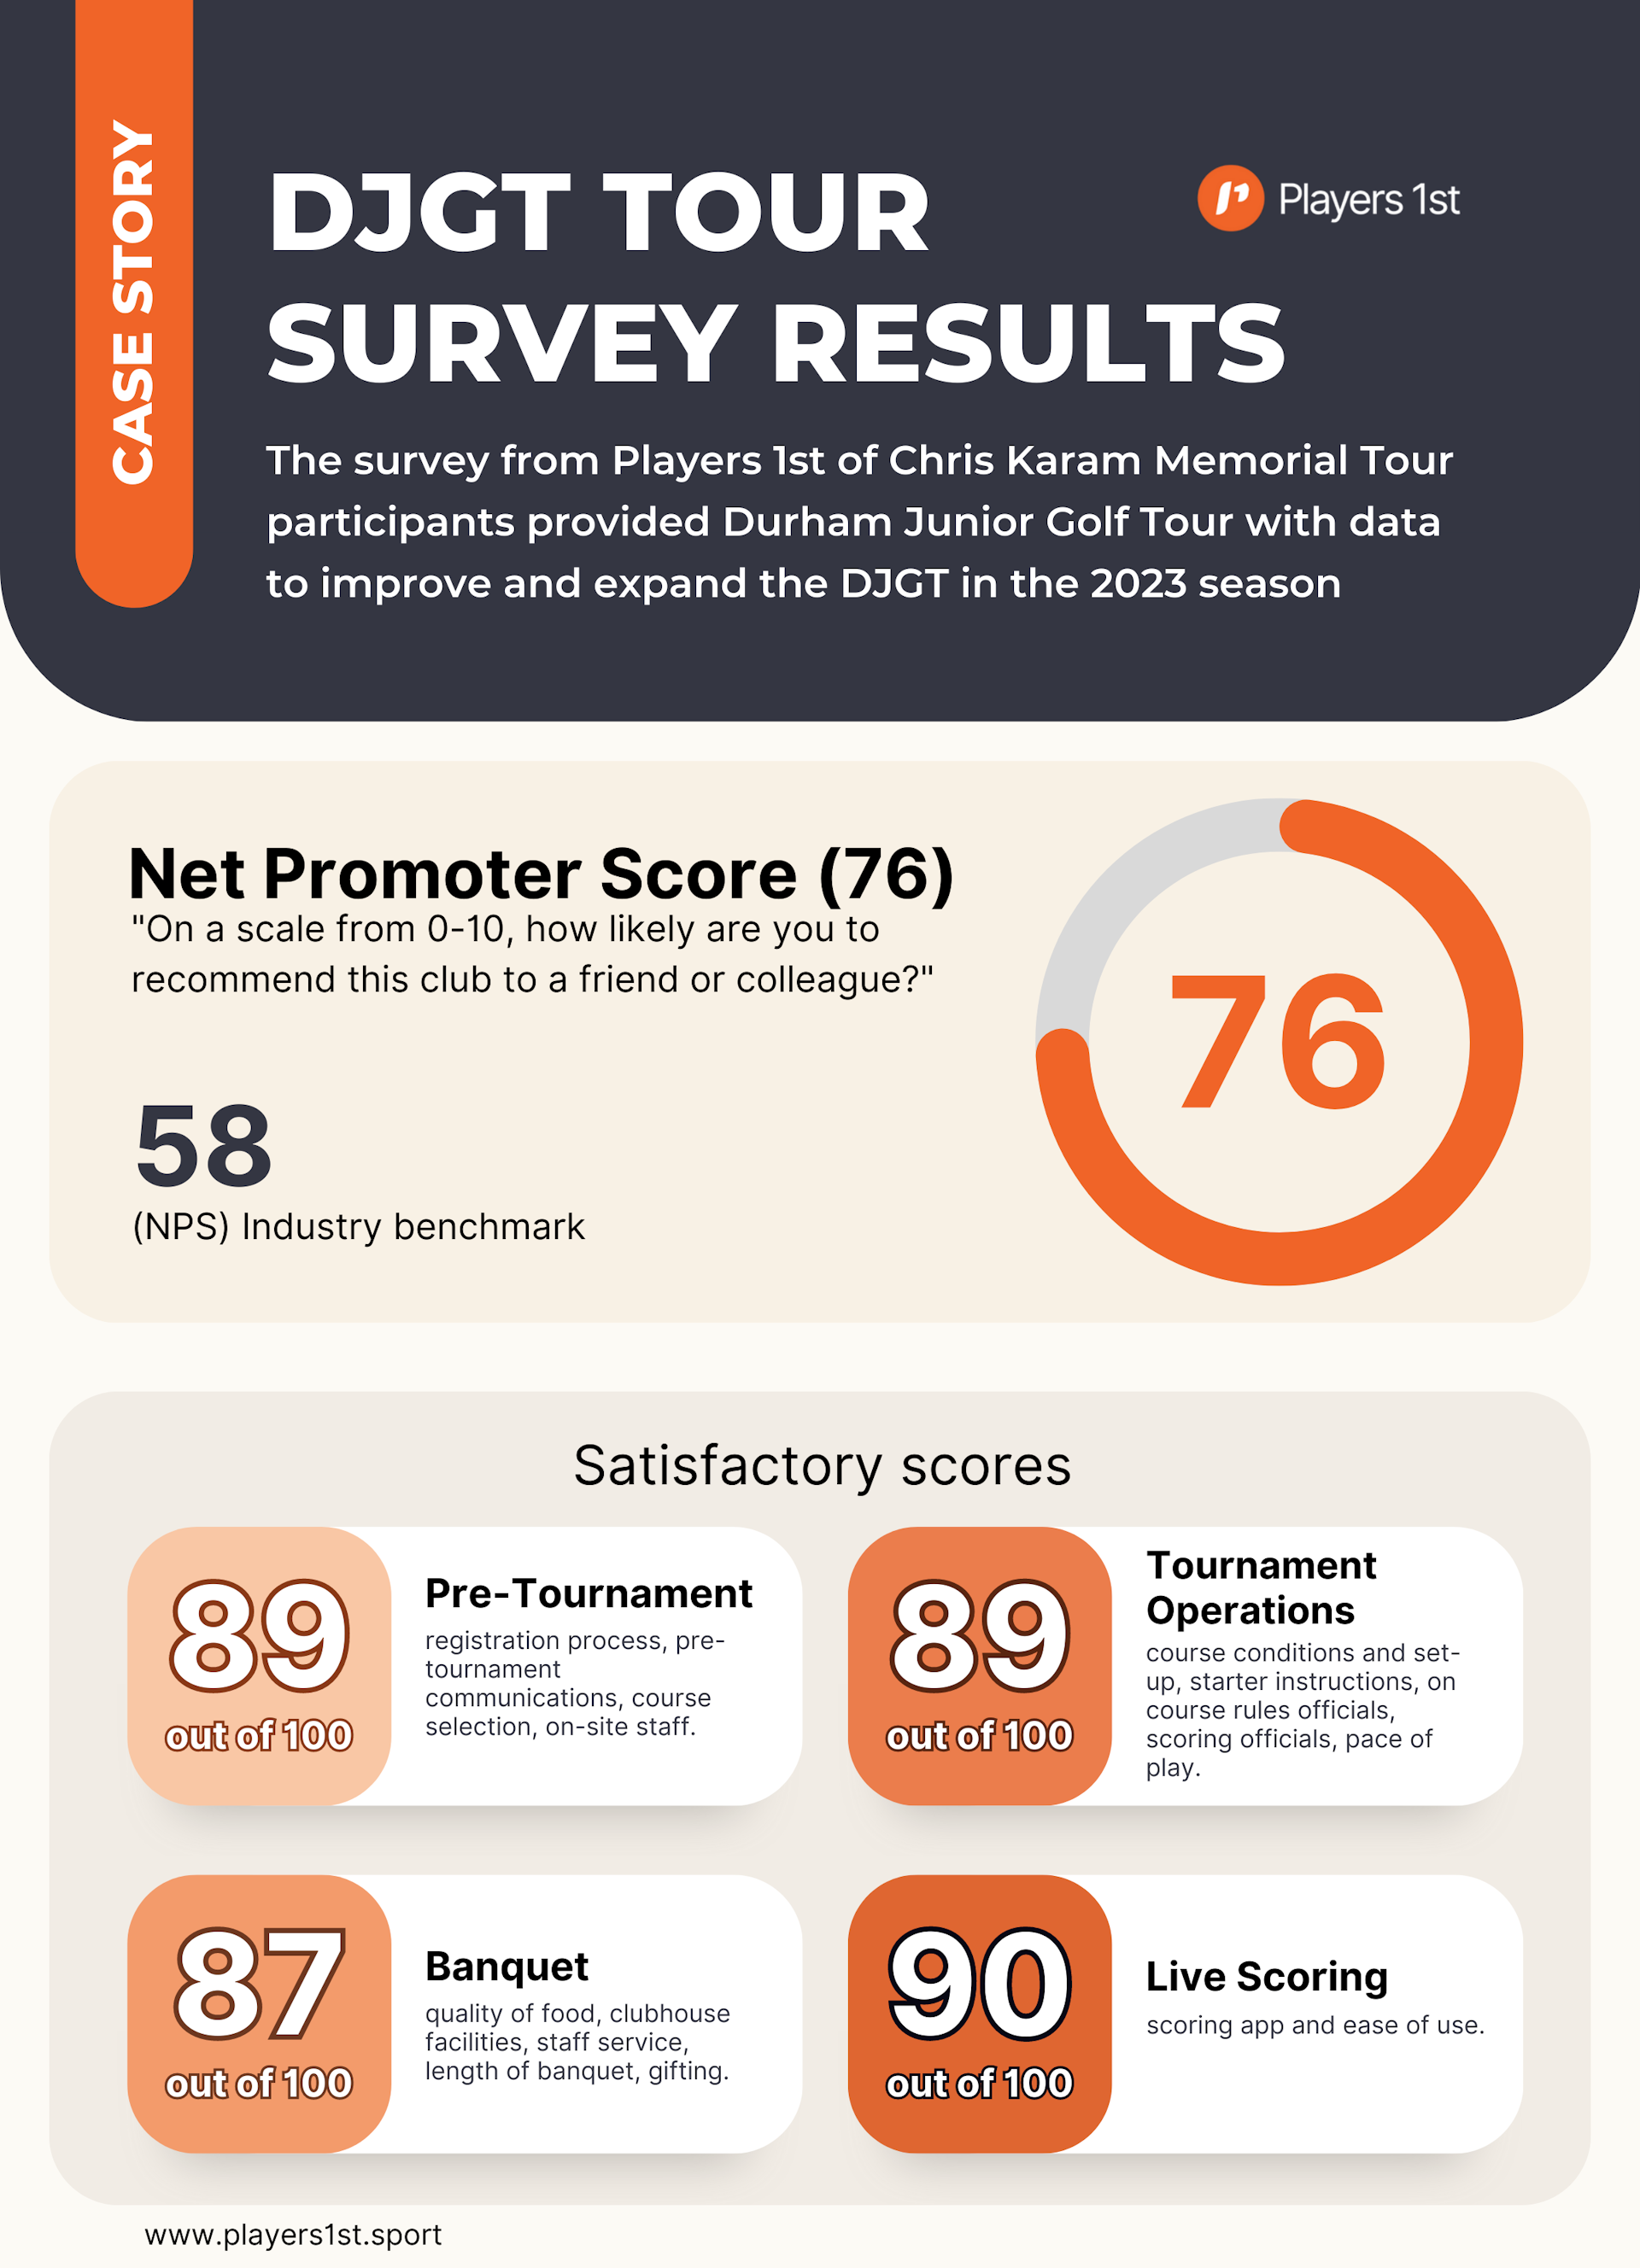 Durham Junior Golf Tour Players 1st Tournament Survey results. Net Promoter Score +76. High satisfactory scores. Customer experience management for golf clubs. 